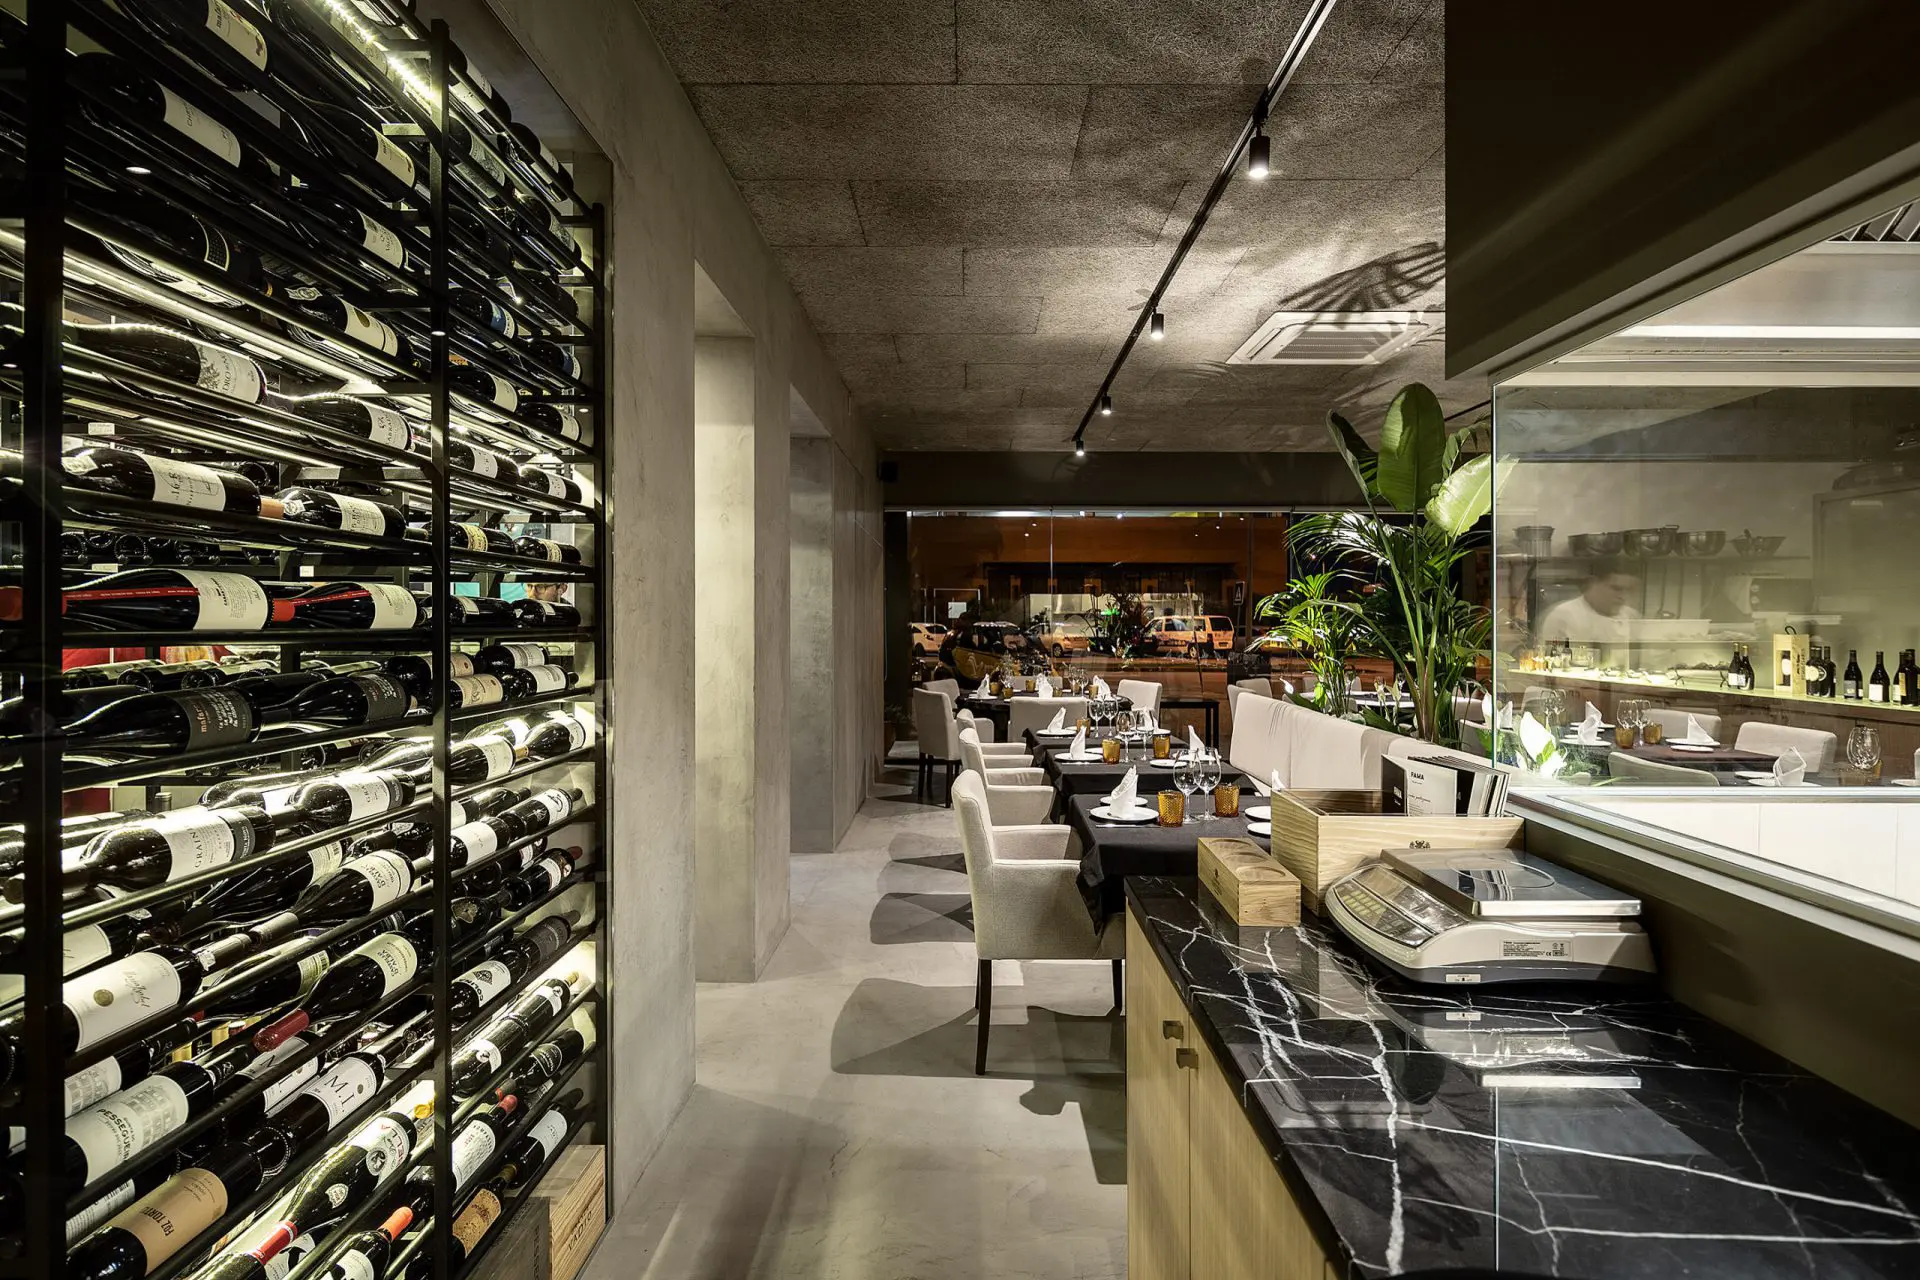 FAMA Restaurant: the first gastronomic project of chef Luis Lavrador